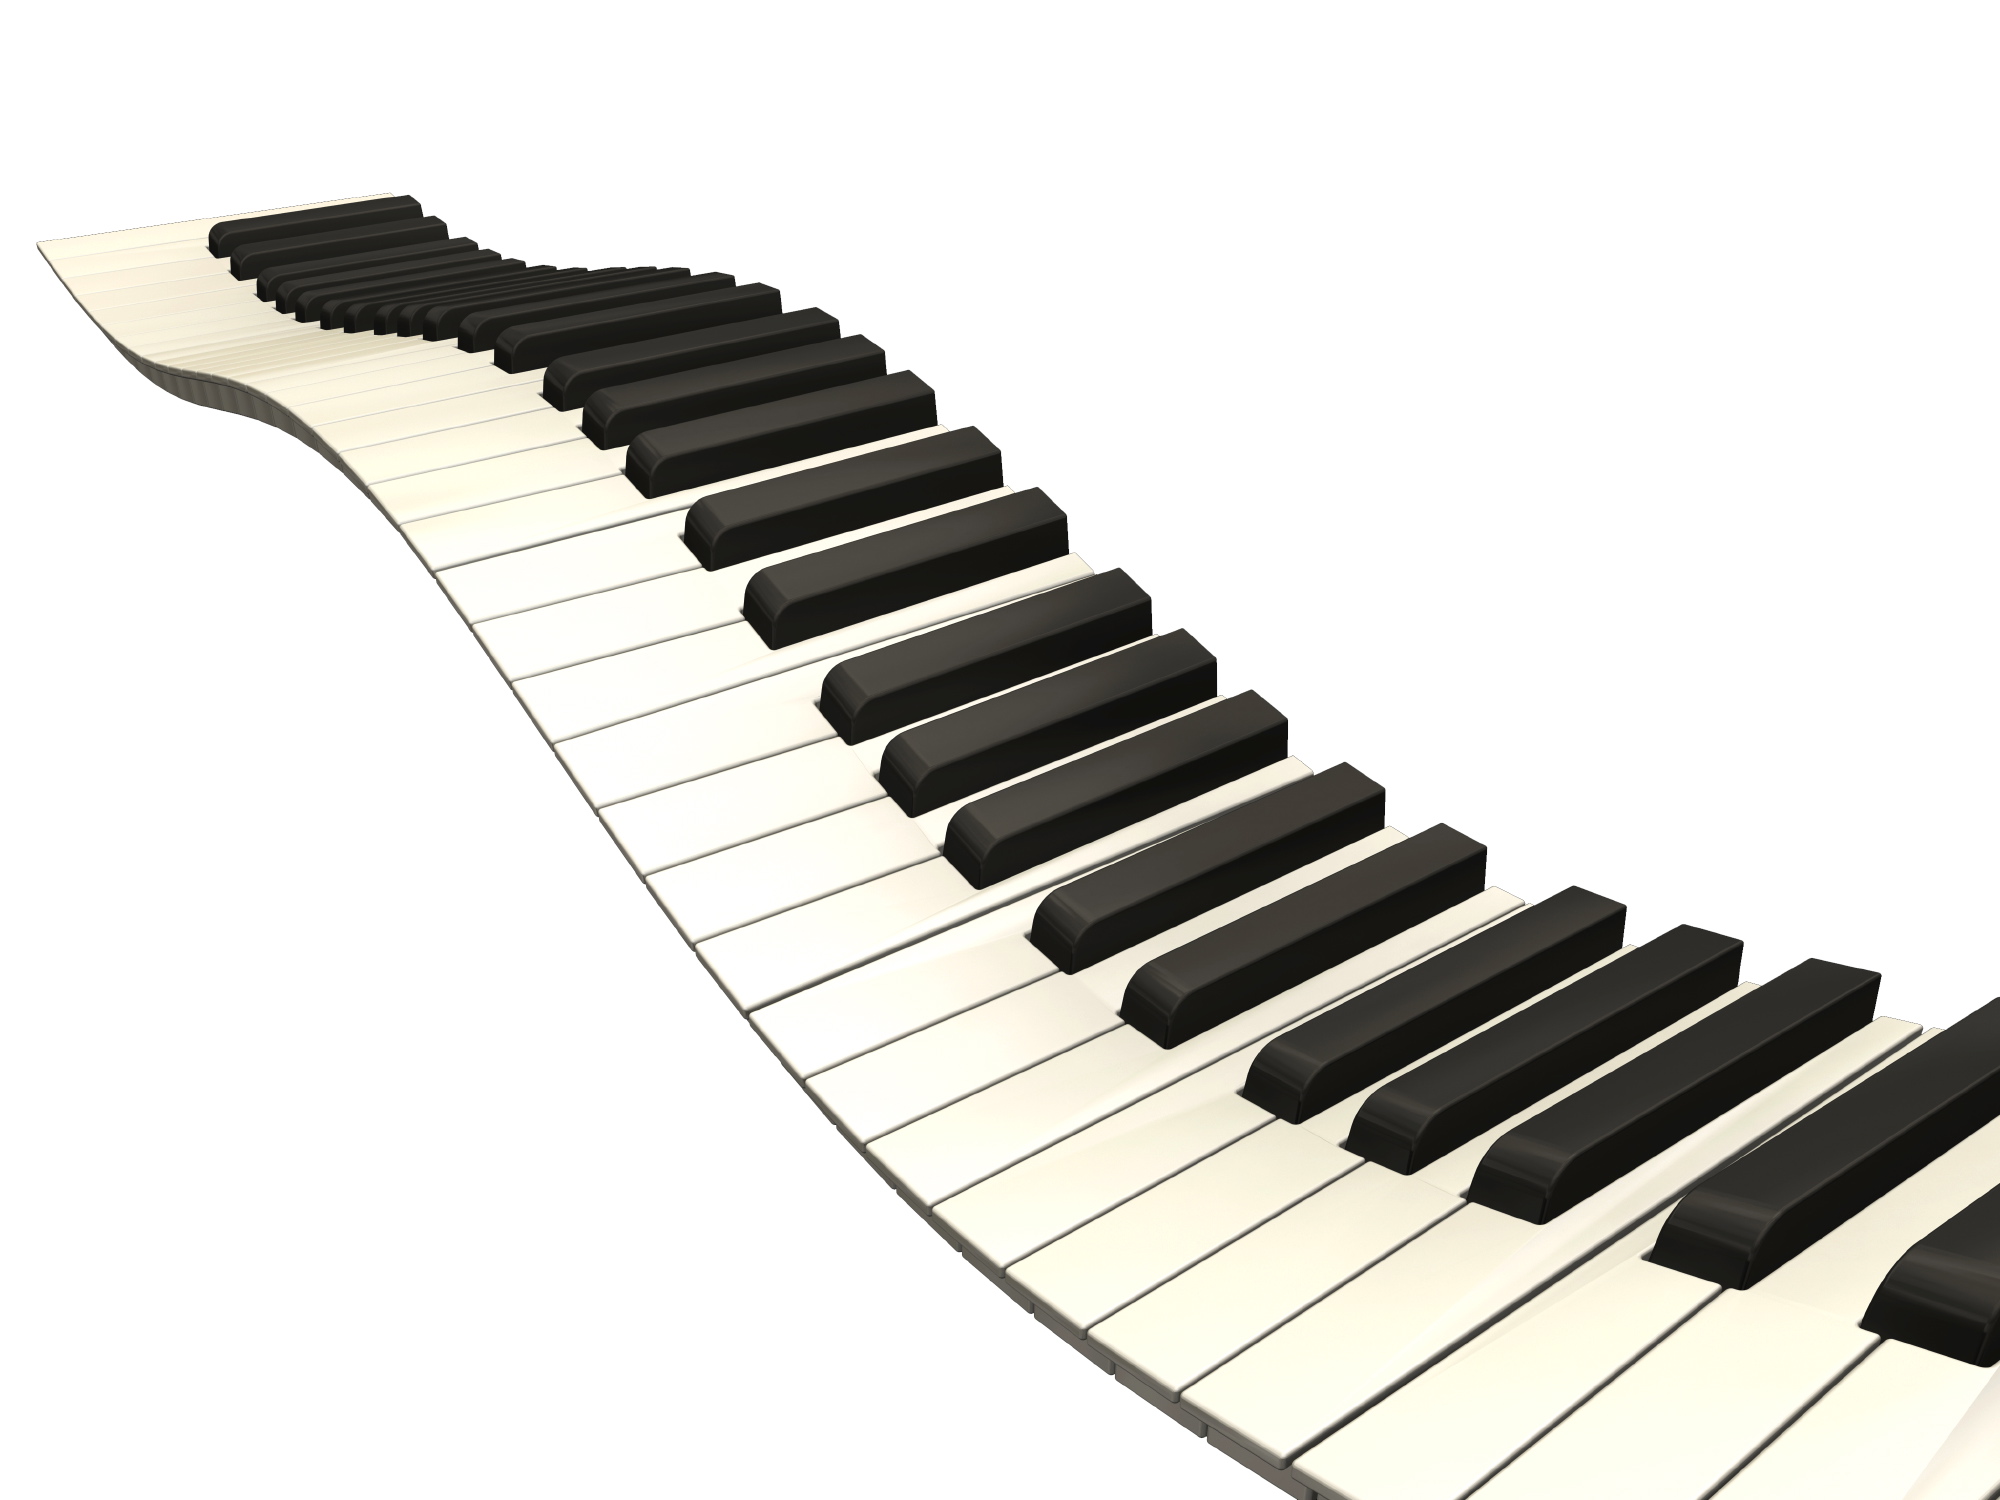 Piano Key Images - Cliparts.co